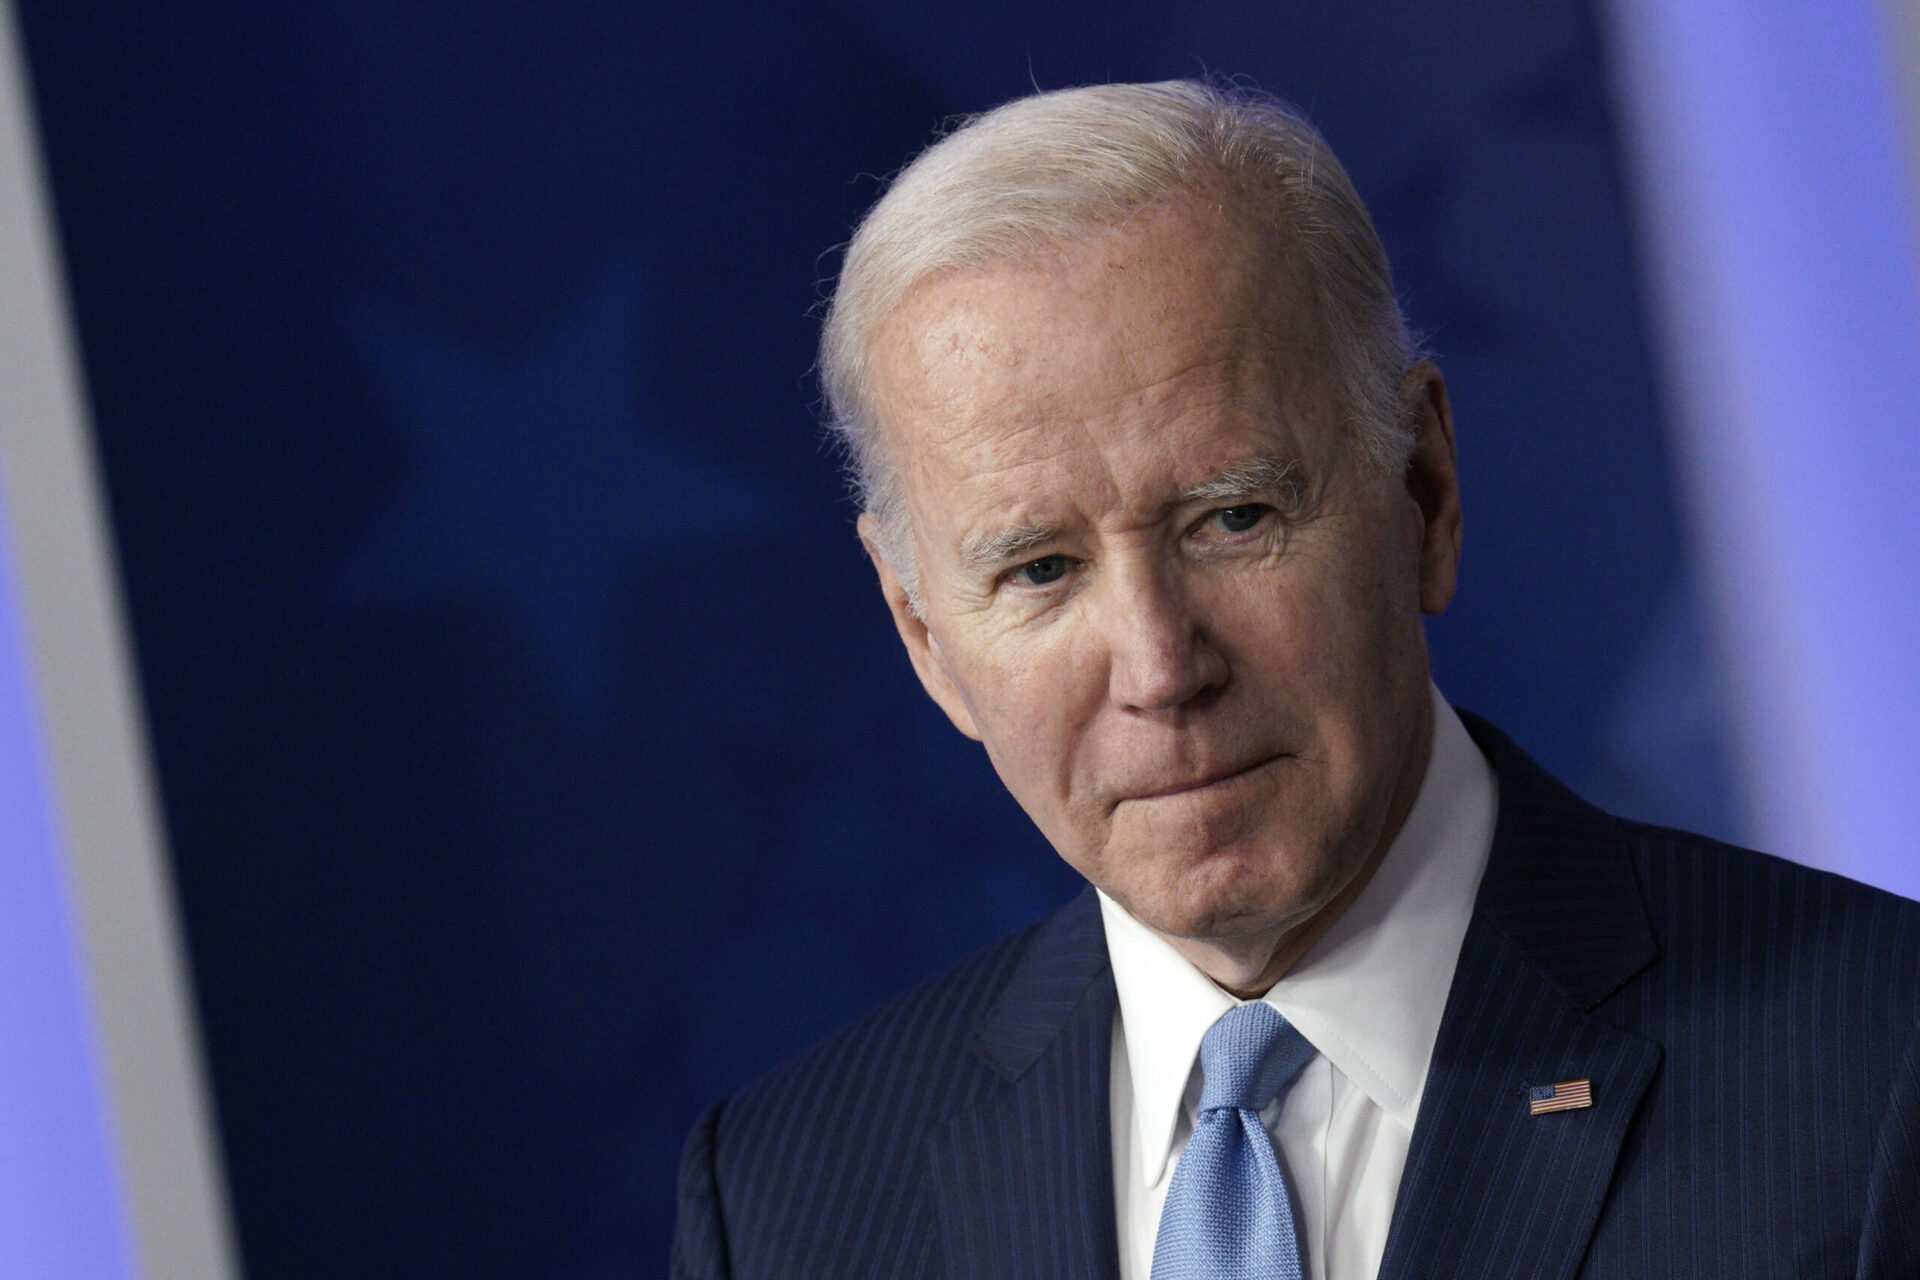 Biden to sign new gun control order: ‘As close to universal background checks as possible’